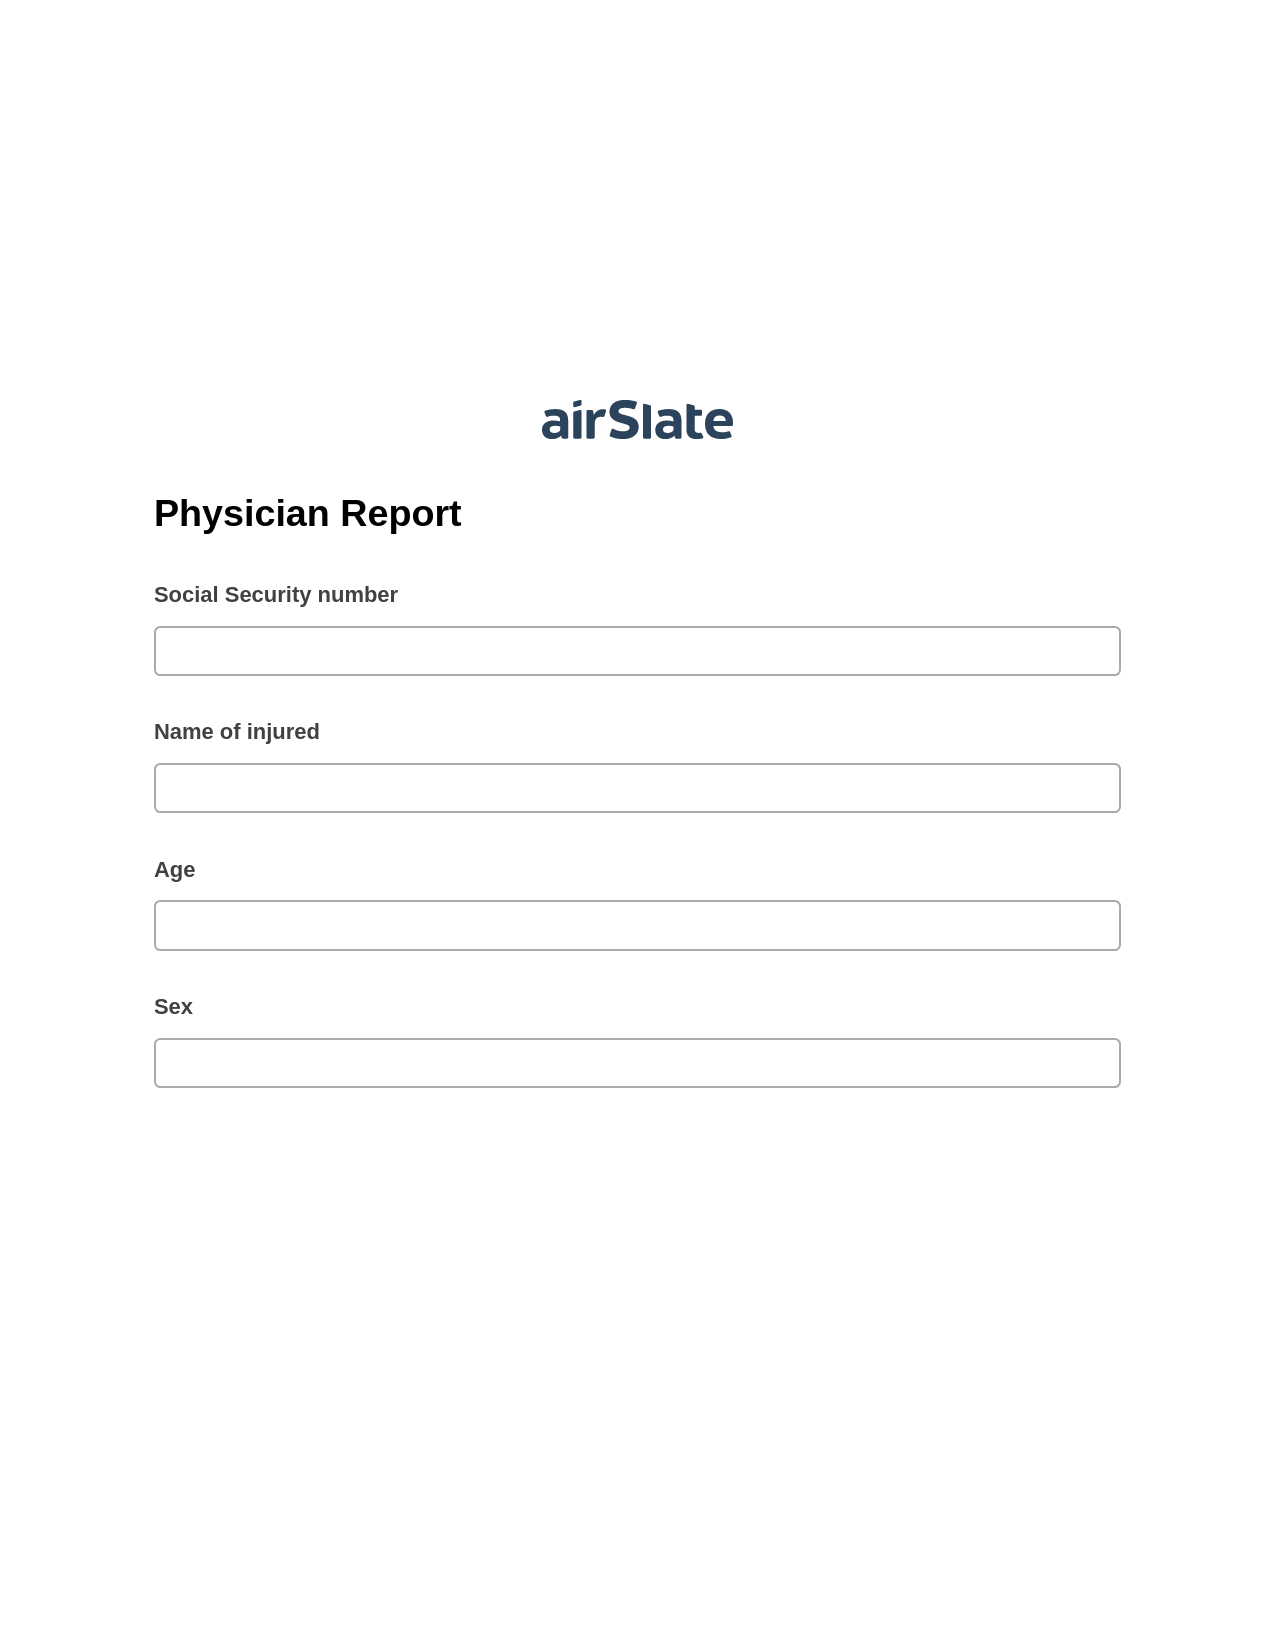 Physician Report Pre-fill from CSV File Bot, Create slate addon, Archive to OneDrive Bot